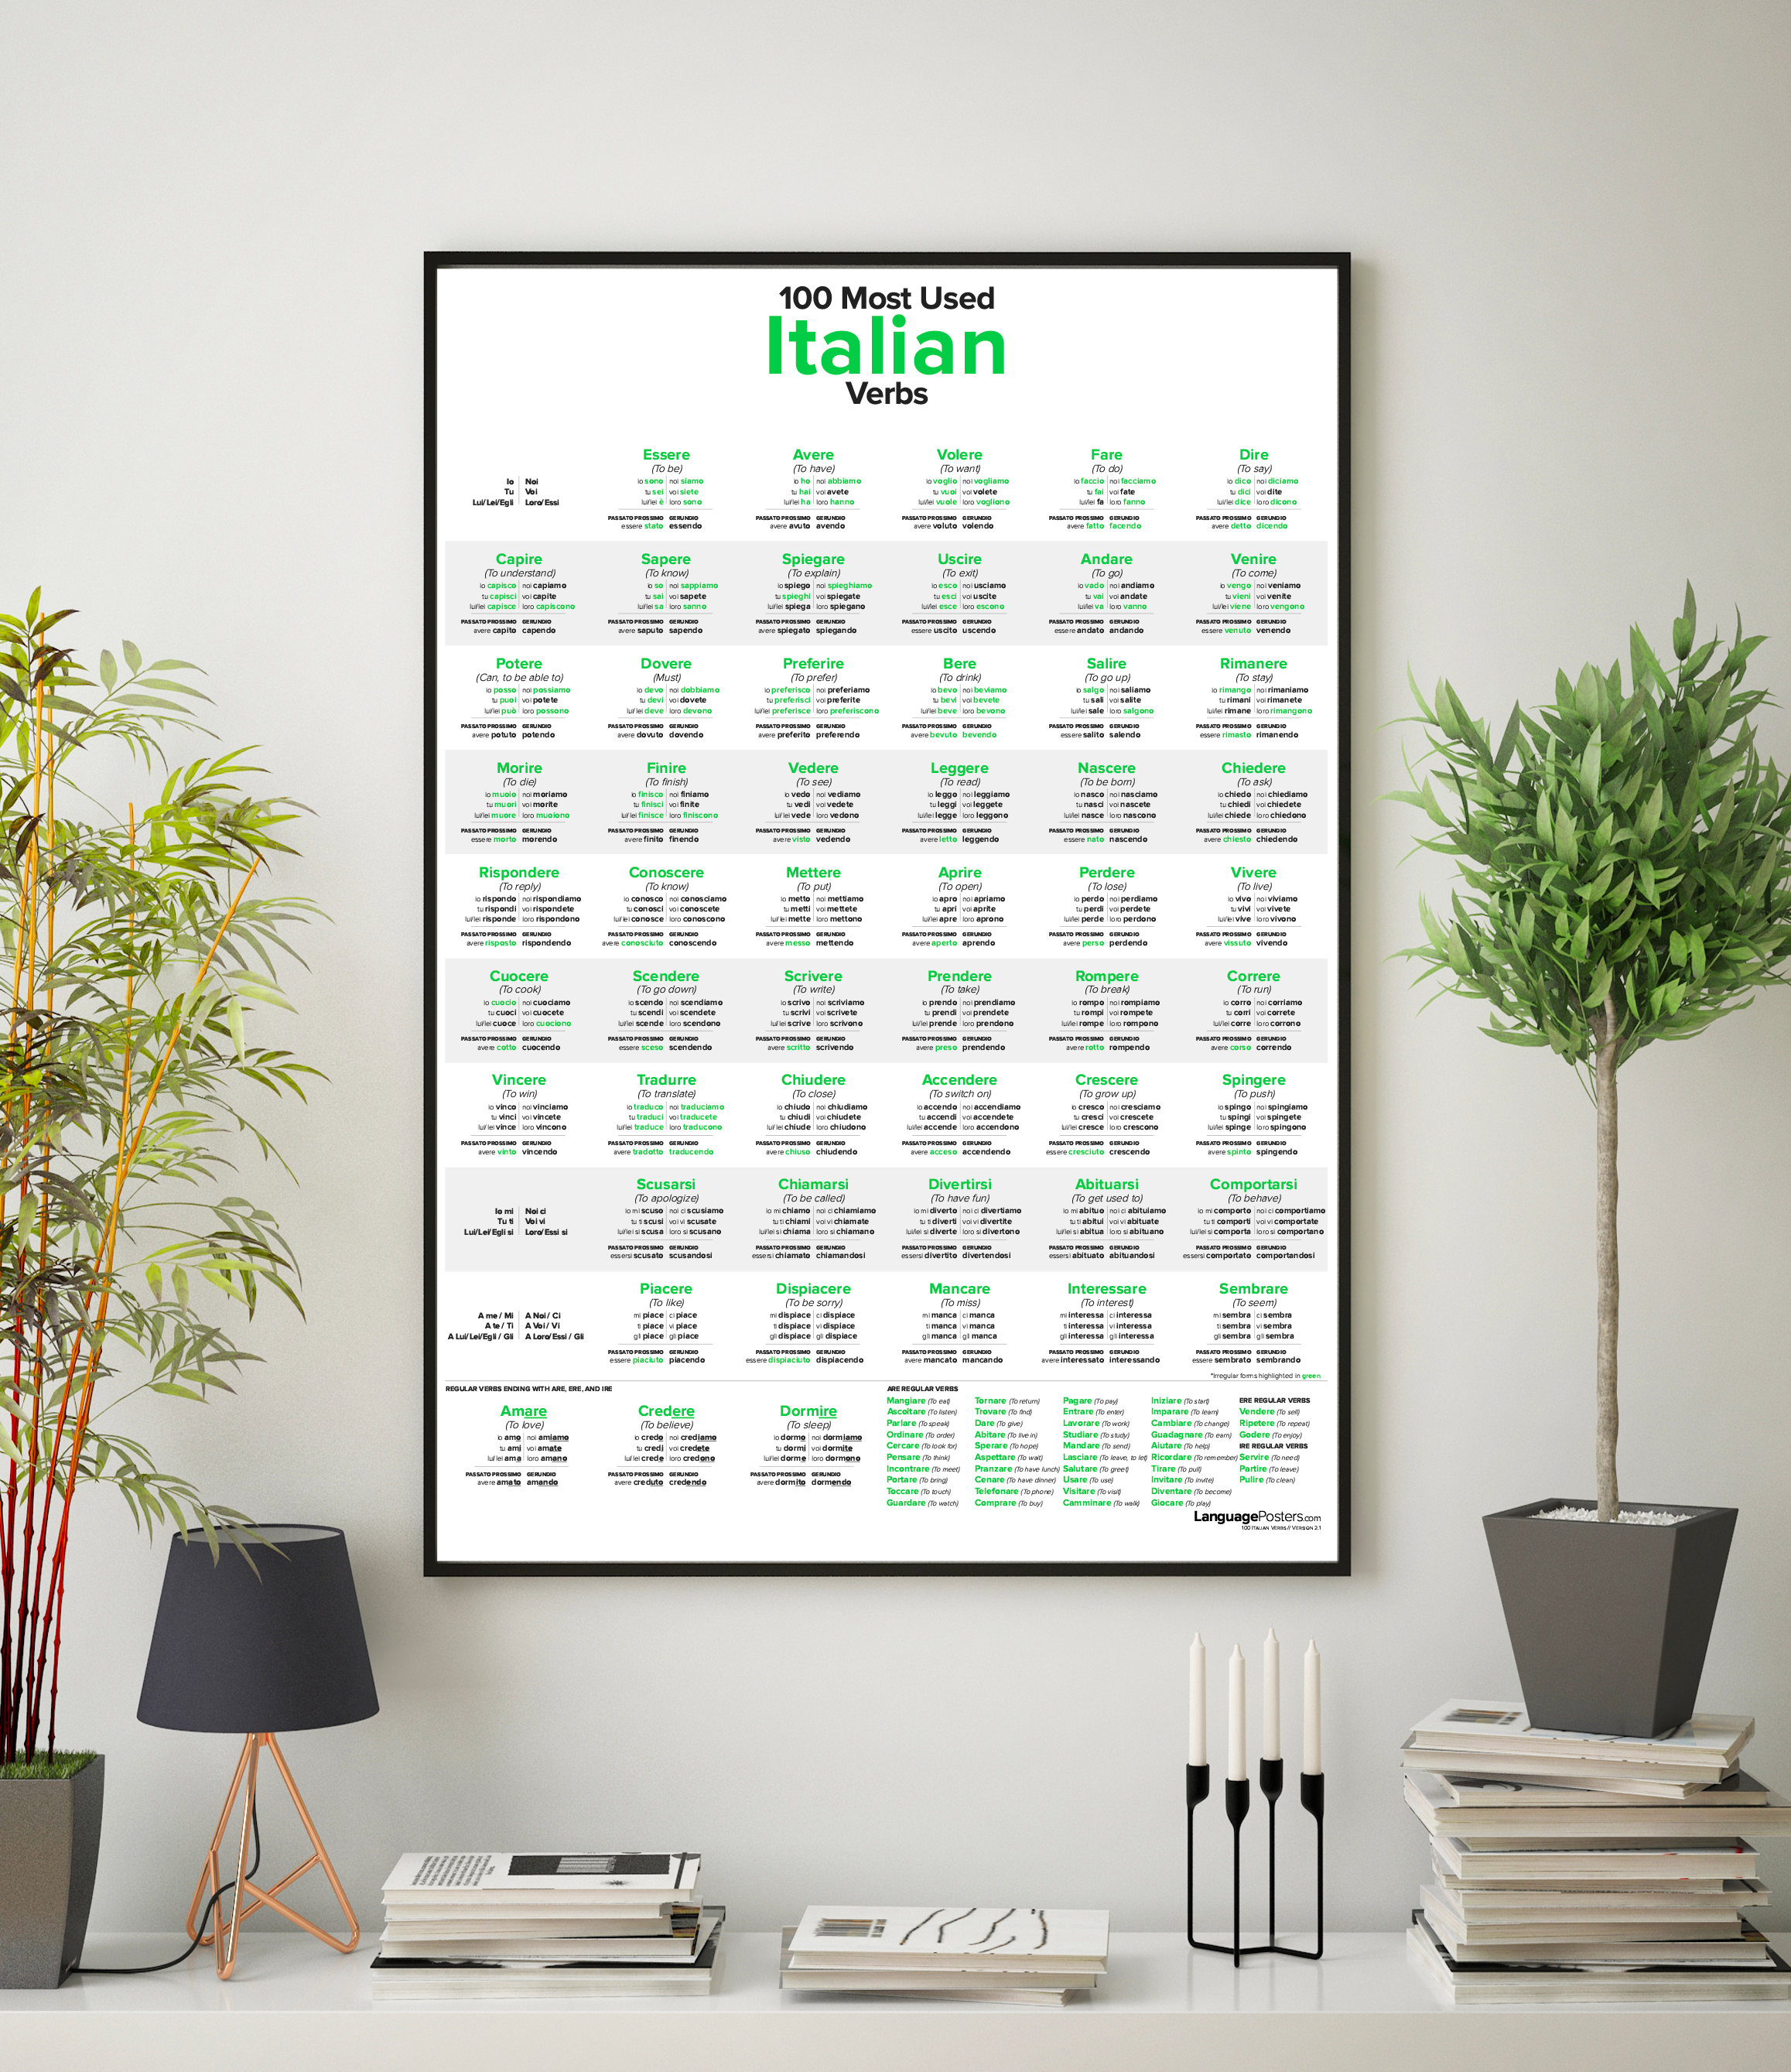 100 Most Used Italian Verbs Poster in frame - LanguagePosters.com